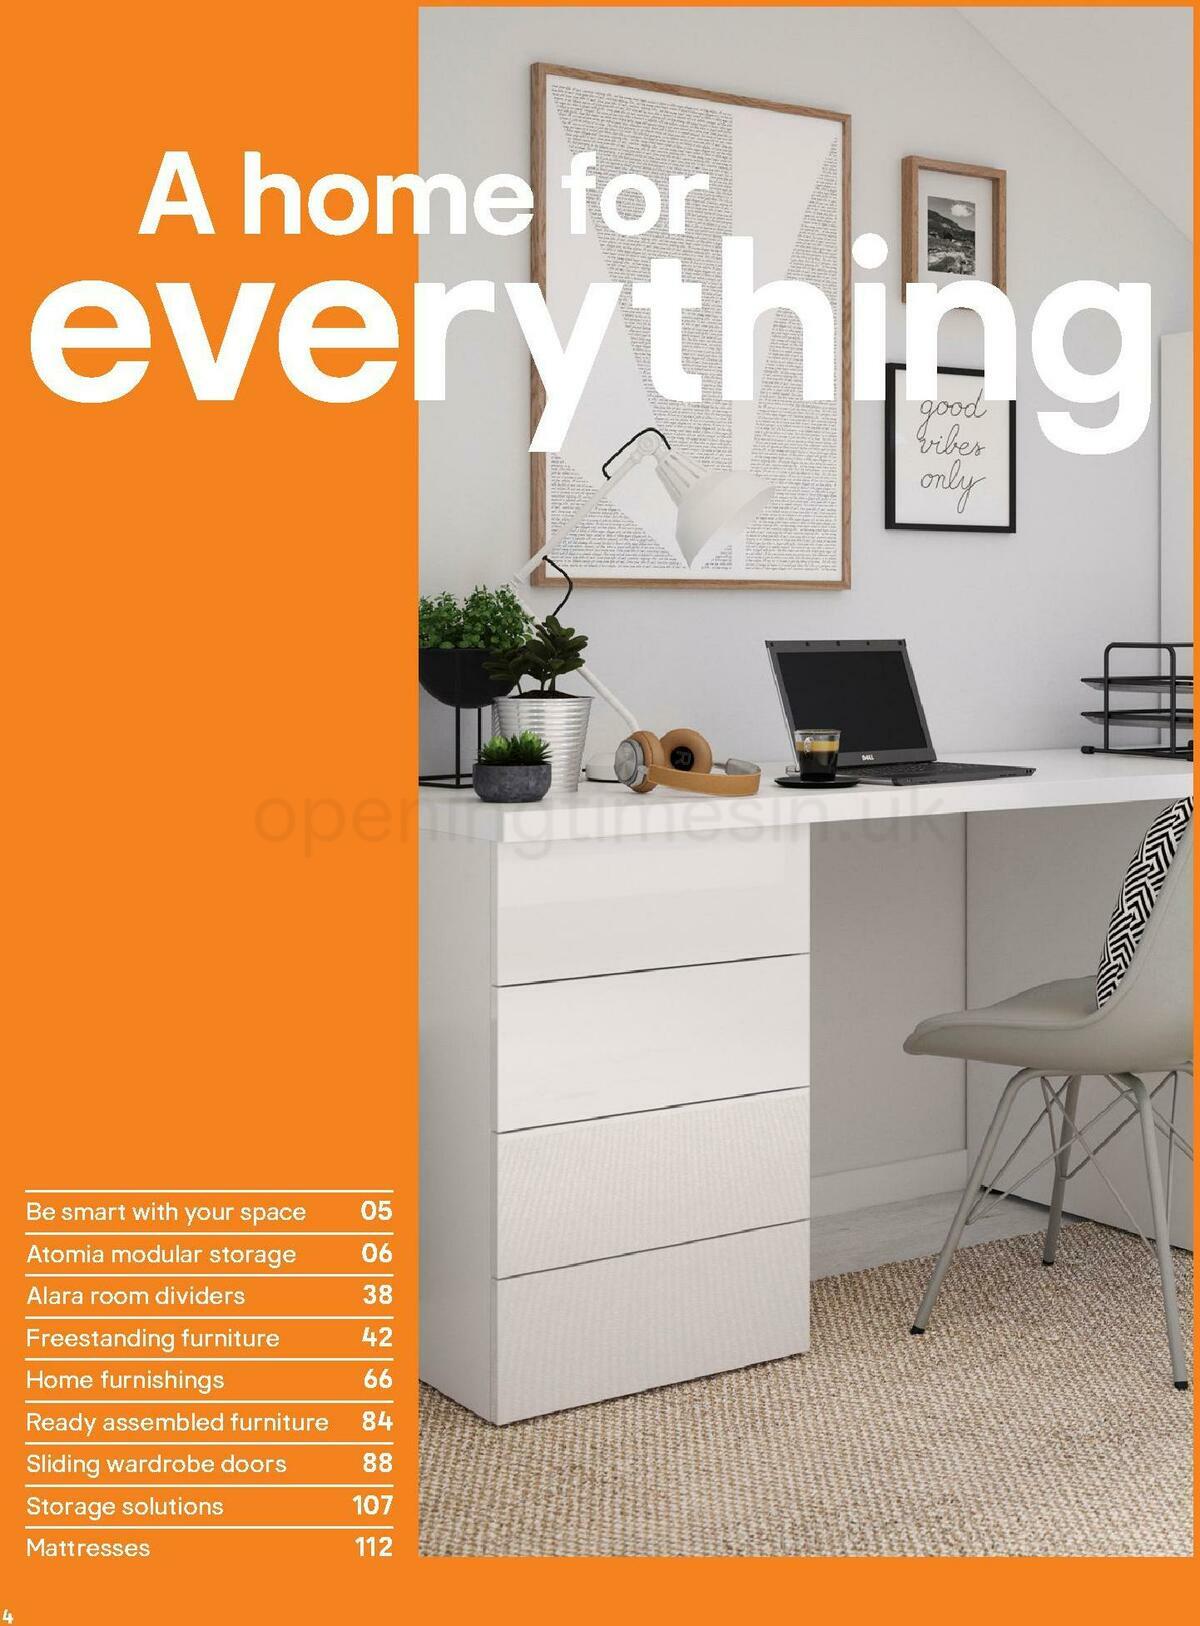 B&Q Indoor Furniture Offers from 1 September